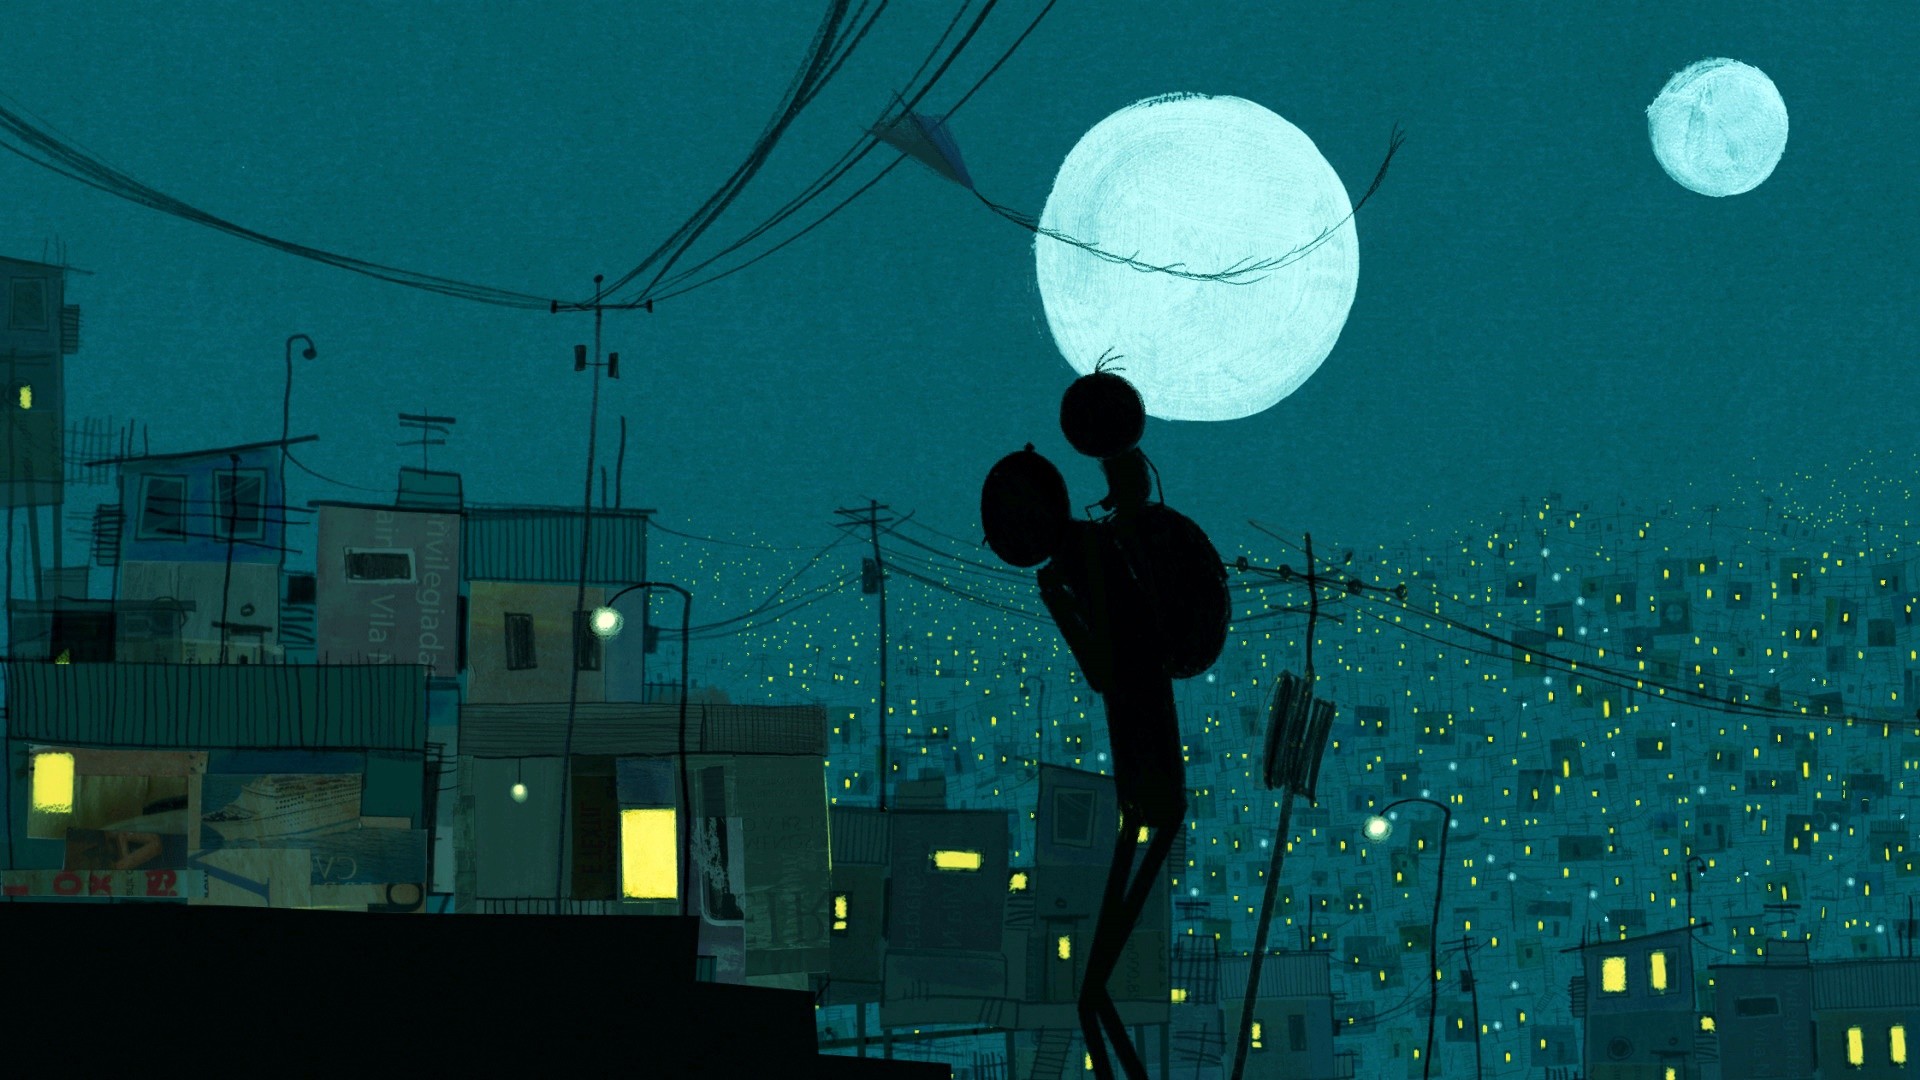 A scene from GKIDS' Boy and the World (2015)